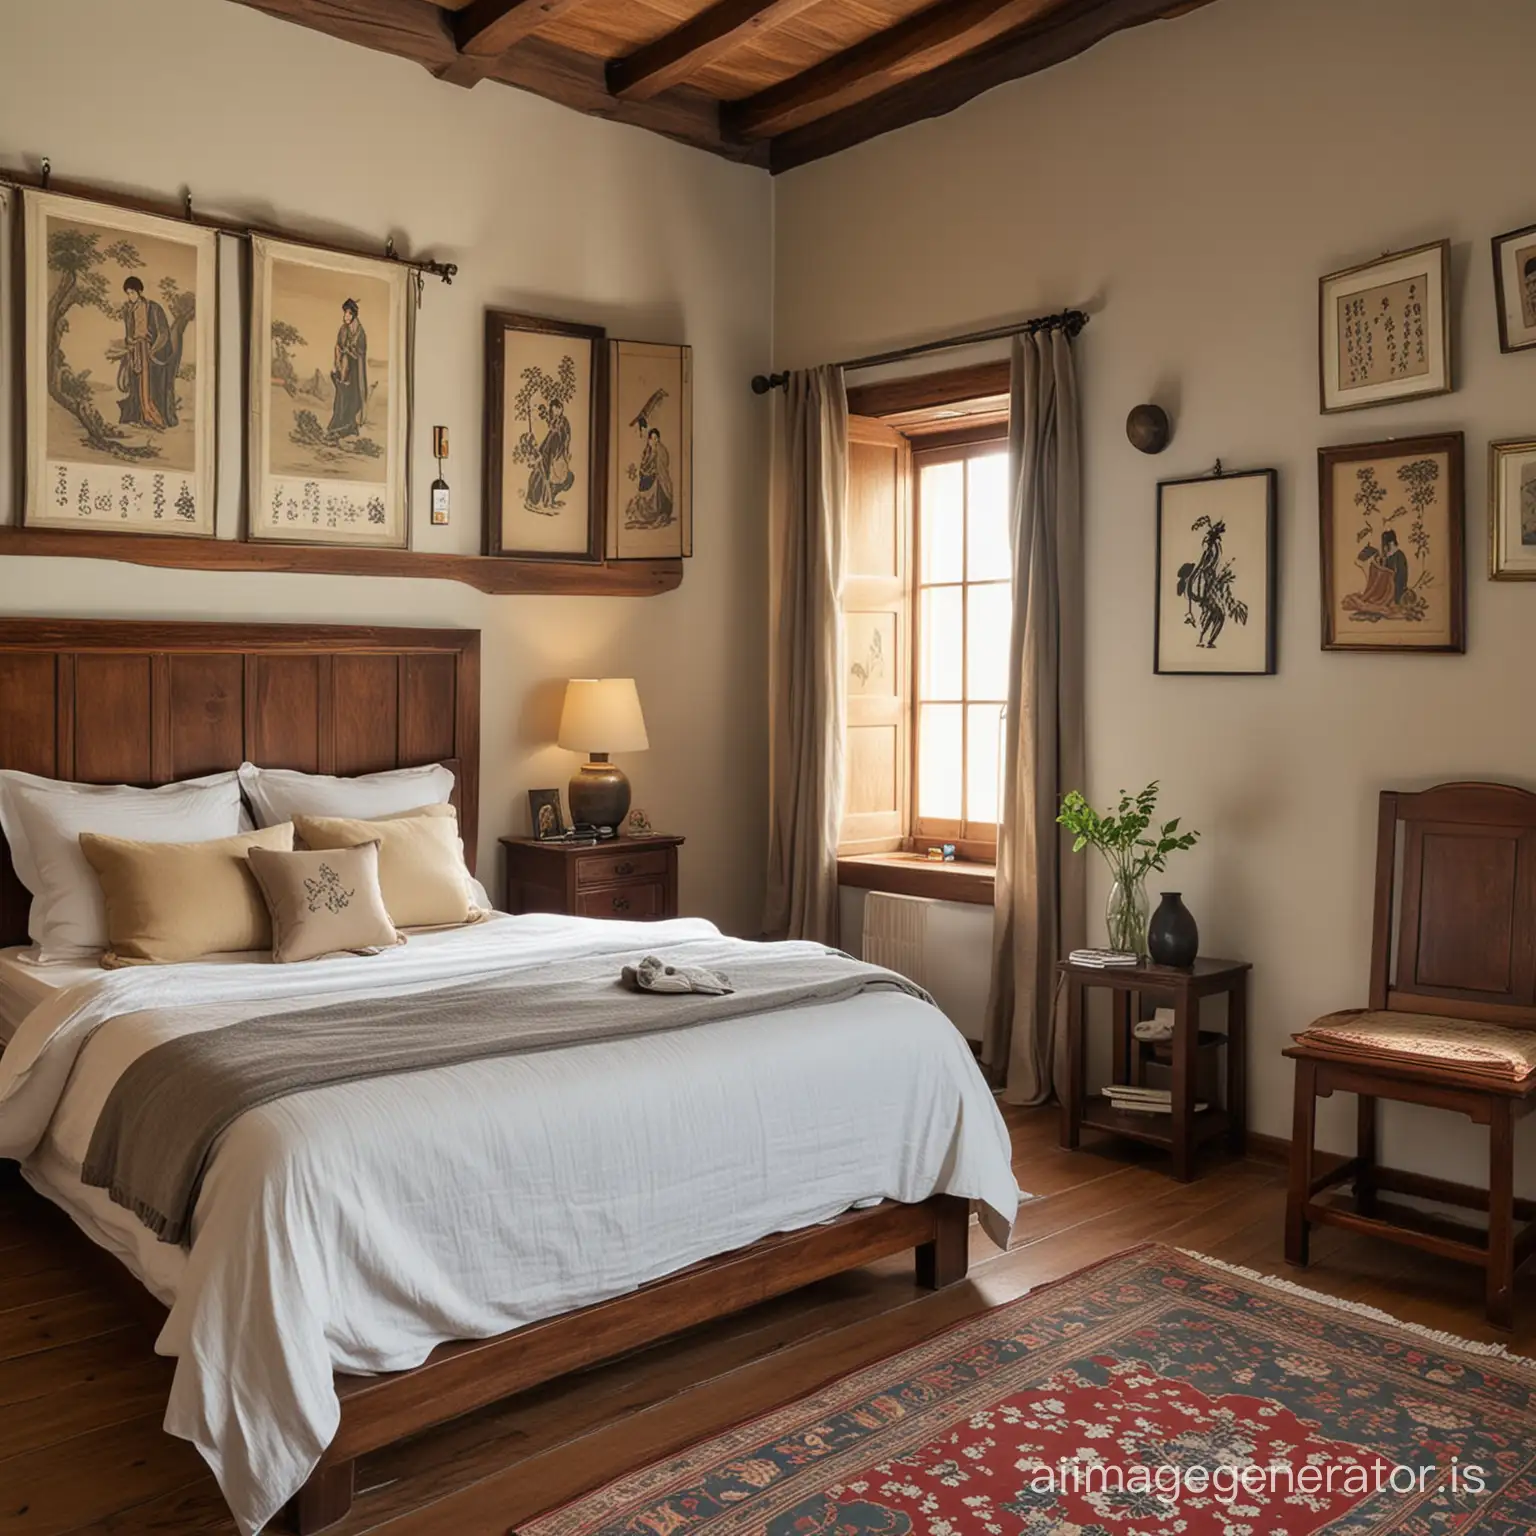 Bedroom with single bed, Asian style, old-fashioned, pictures alsia on the wall, without lamps, medival
